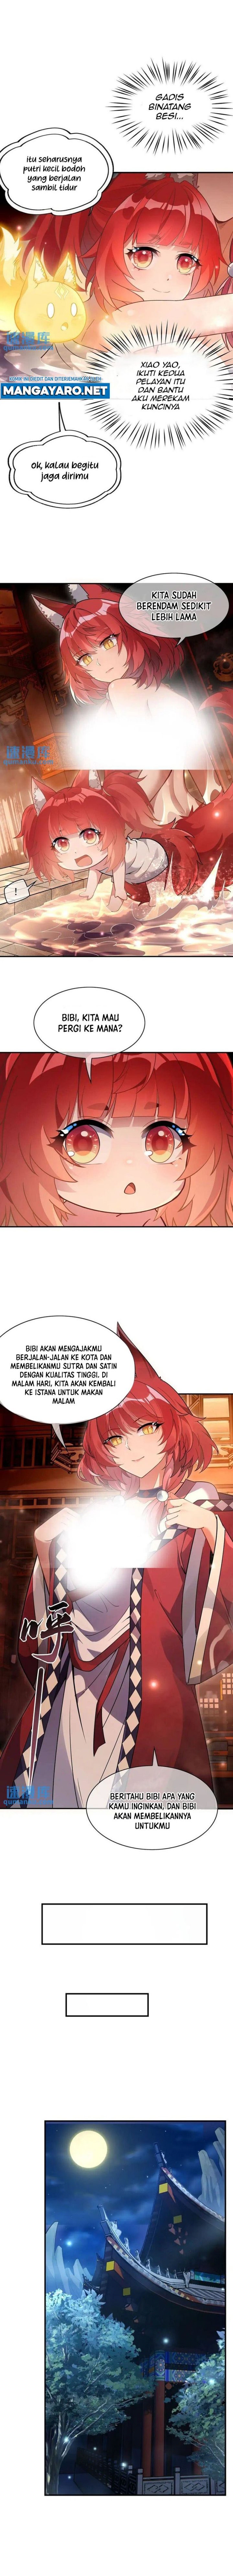 Dilarang COPAS - situs resmi www.mangacanblog.com - Komik my female apprentices are all big shots from the future 209 - chapter 209 210 Indonesia my female apprentices are all big shots from the future 209 - chapter 209 Terbaru 6|Baca Manga Komik Indonesia|Mangacan